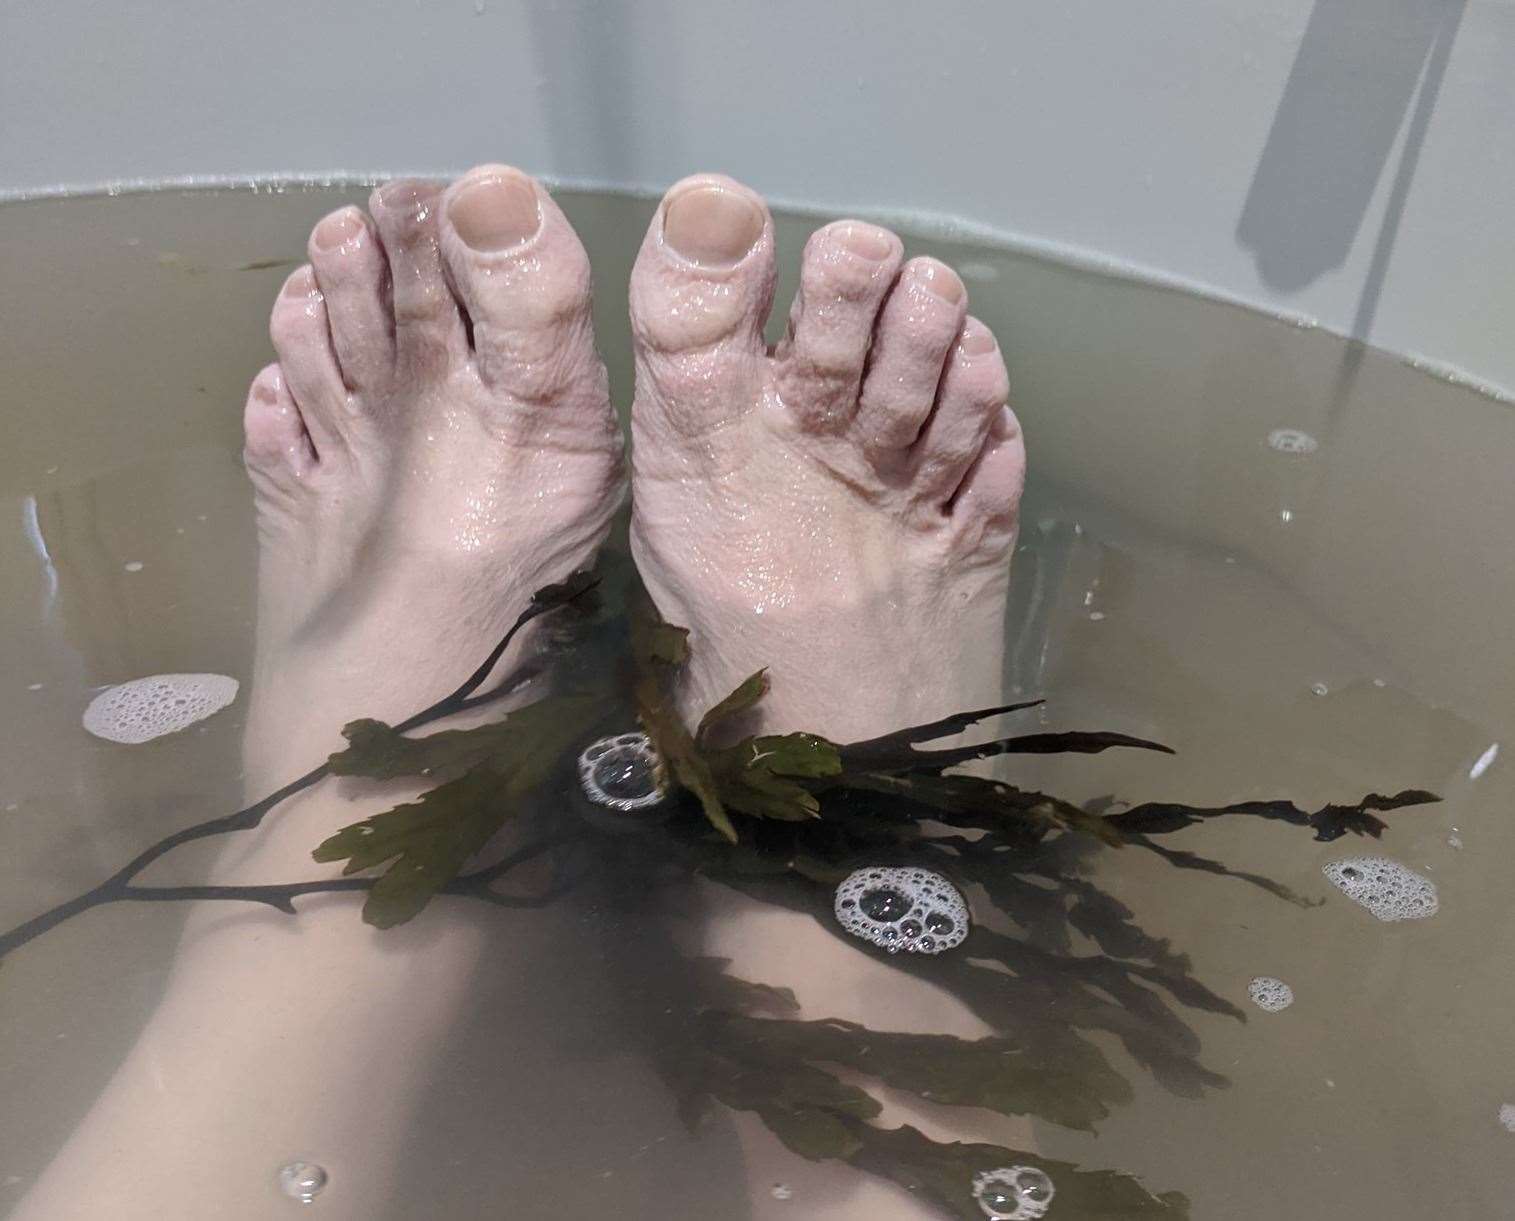 Martin Hunt shows of the effect on his feet after seven hours in the bath